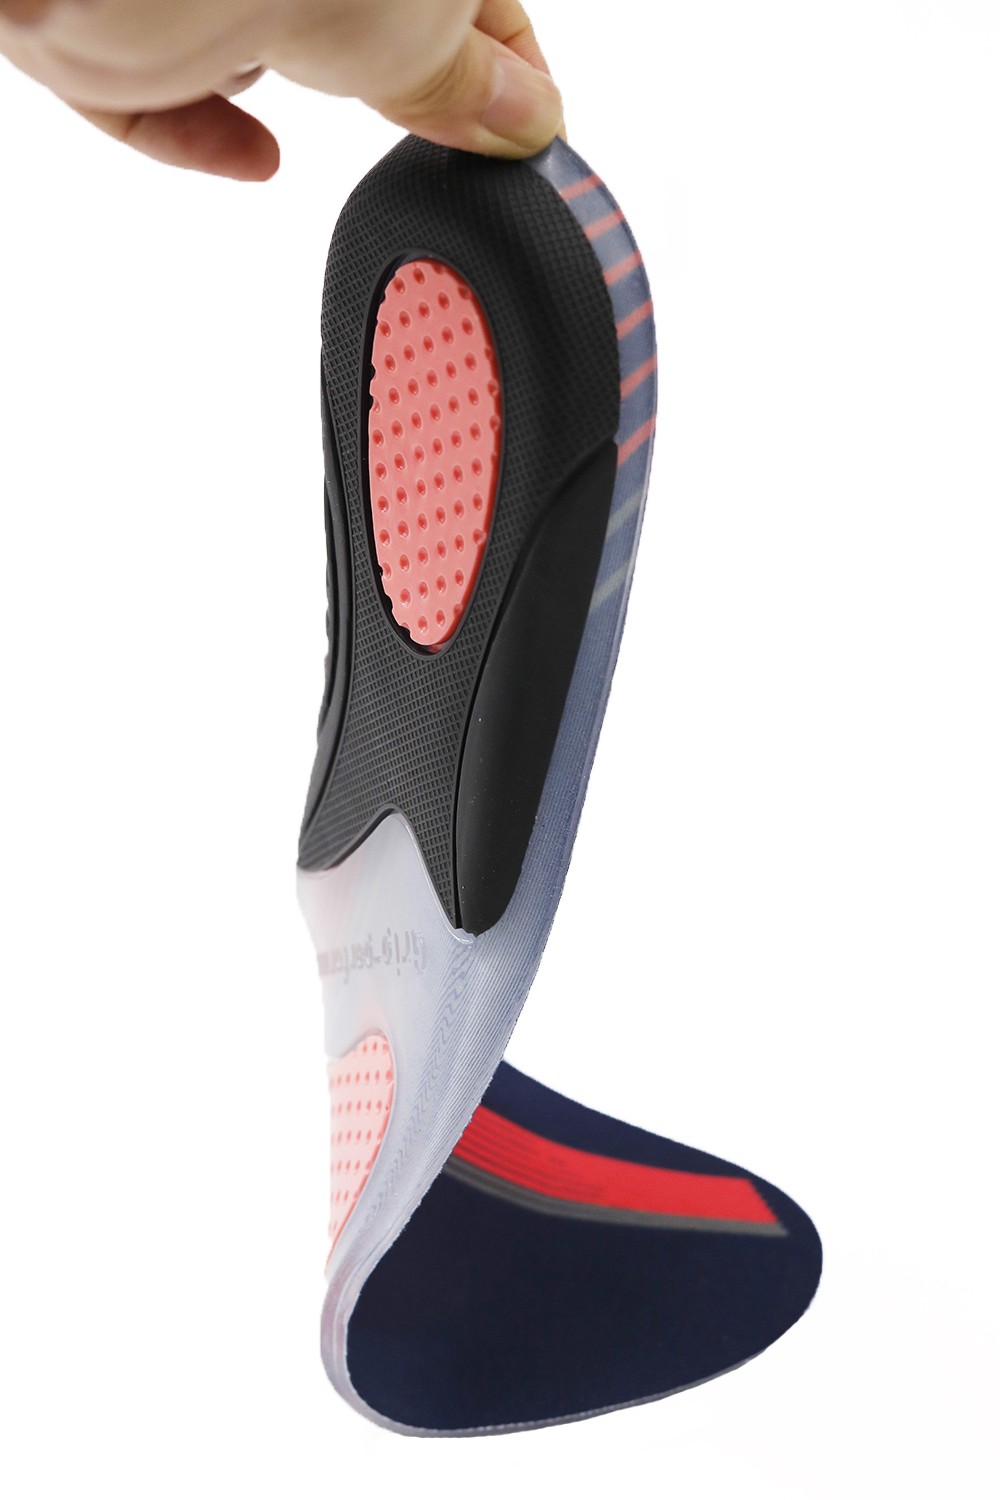 S-King gel active insoles price for running shoes-5